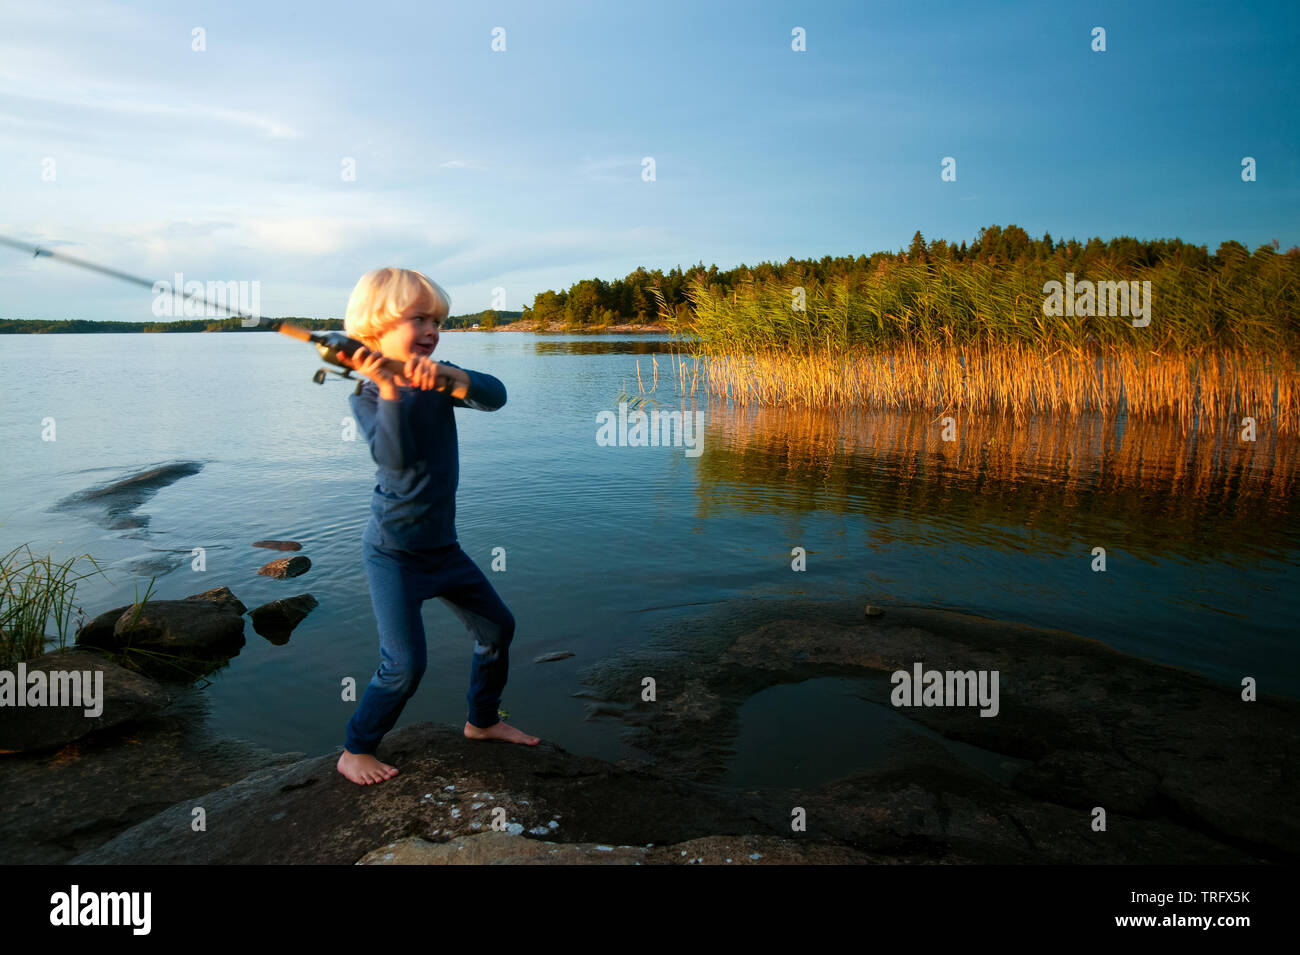 A young boy is fishing at the island Brattholmen in the lake Vansjø, Østfold, Norway. Vansjø is the largest lake in Østfold. The lake Vansjø and its surrounding lakes and rivers are a part of the water system called Morsavassdraget. September, 2006. Stock Photo